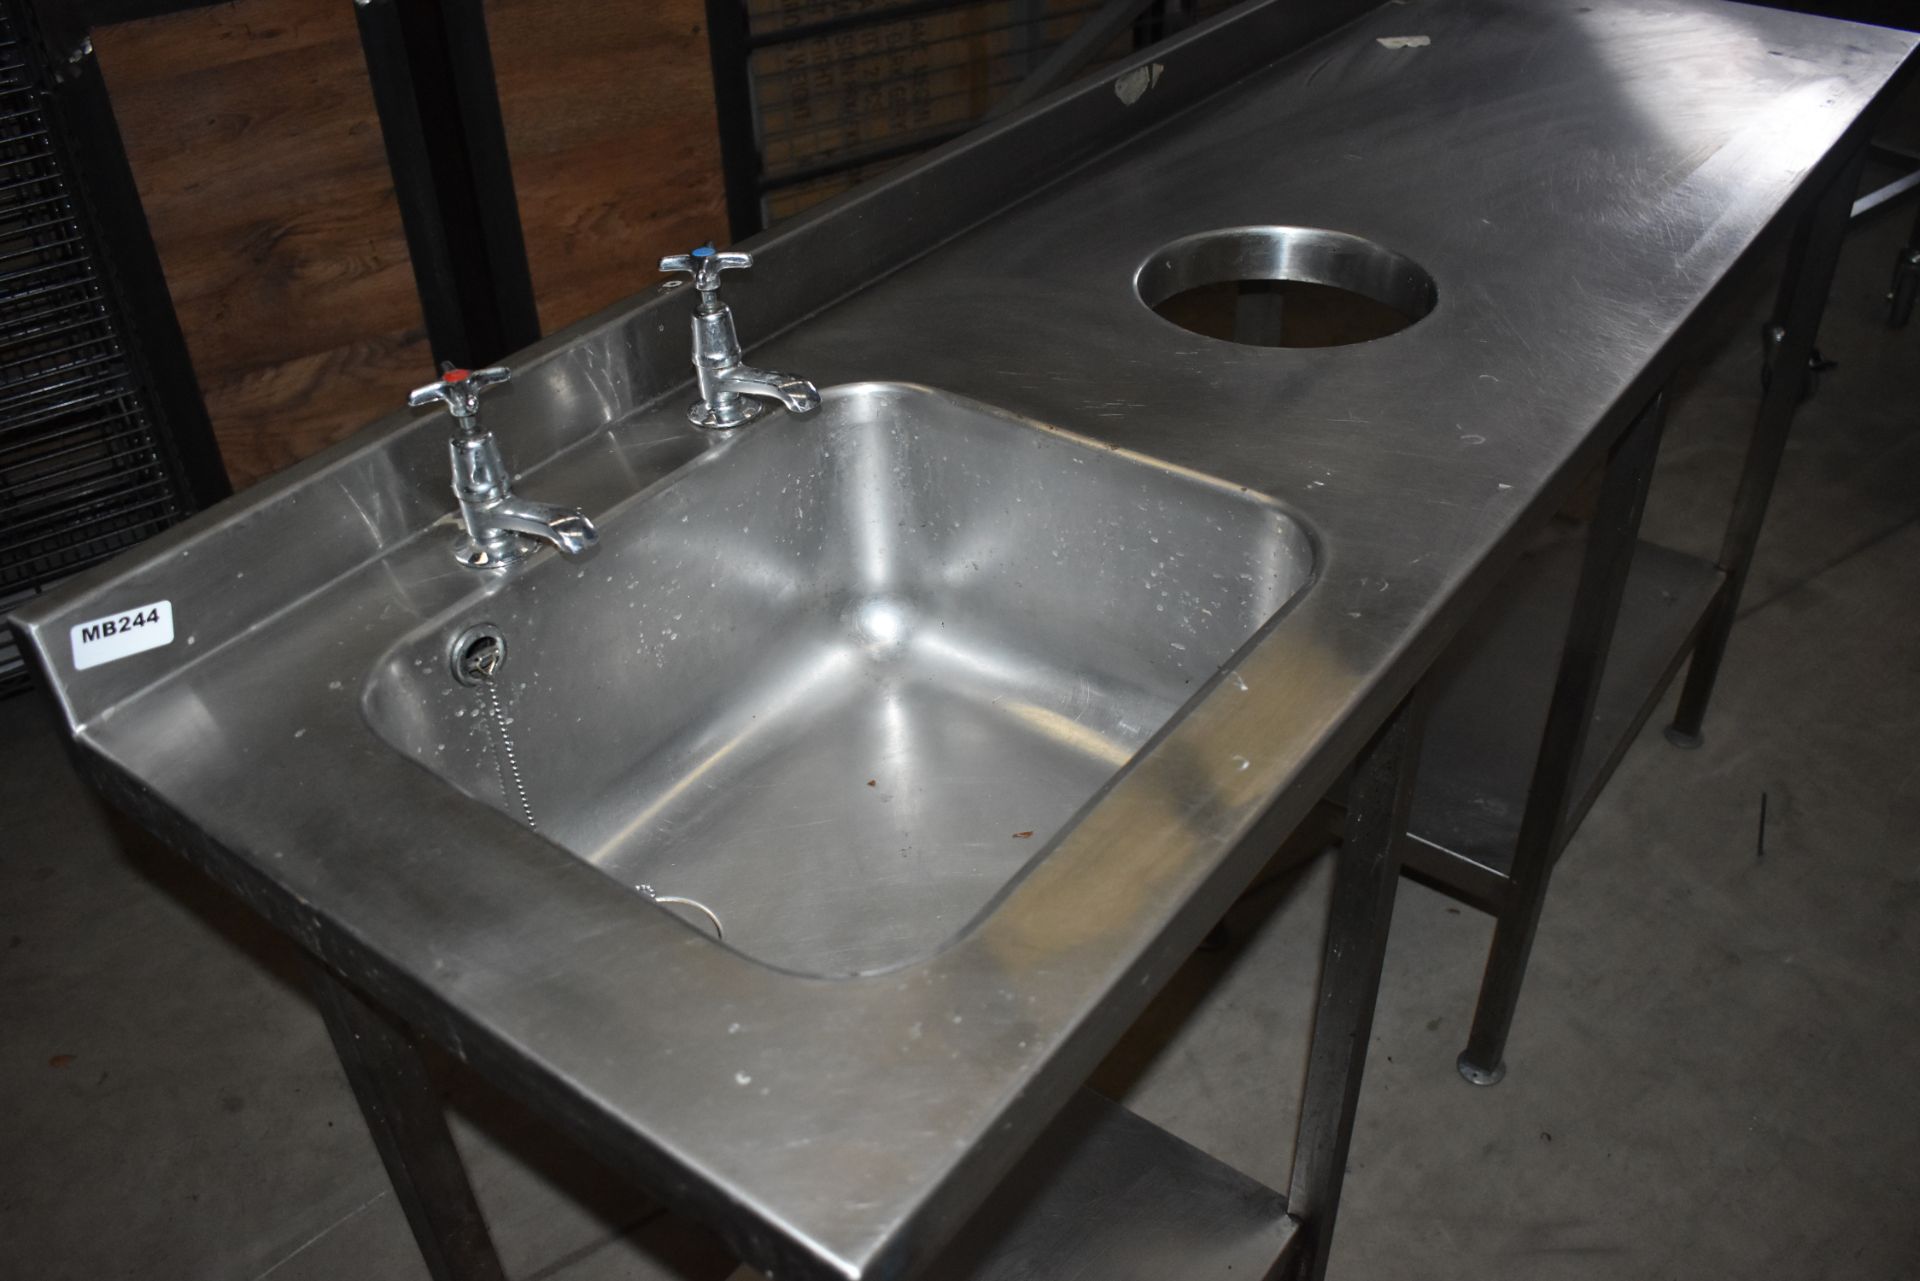 1 x Stainless Steel Wash Basin Prep Table With Undershelves, Upstand, Basin and Taps and Waste Chute - Image 4 of 5